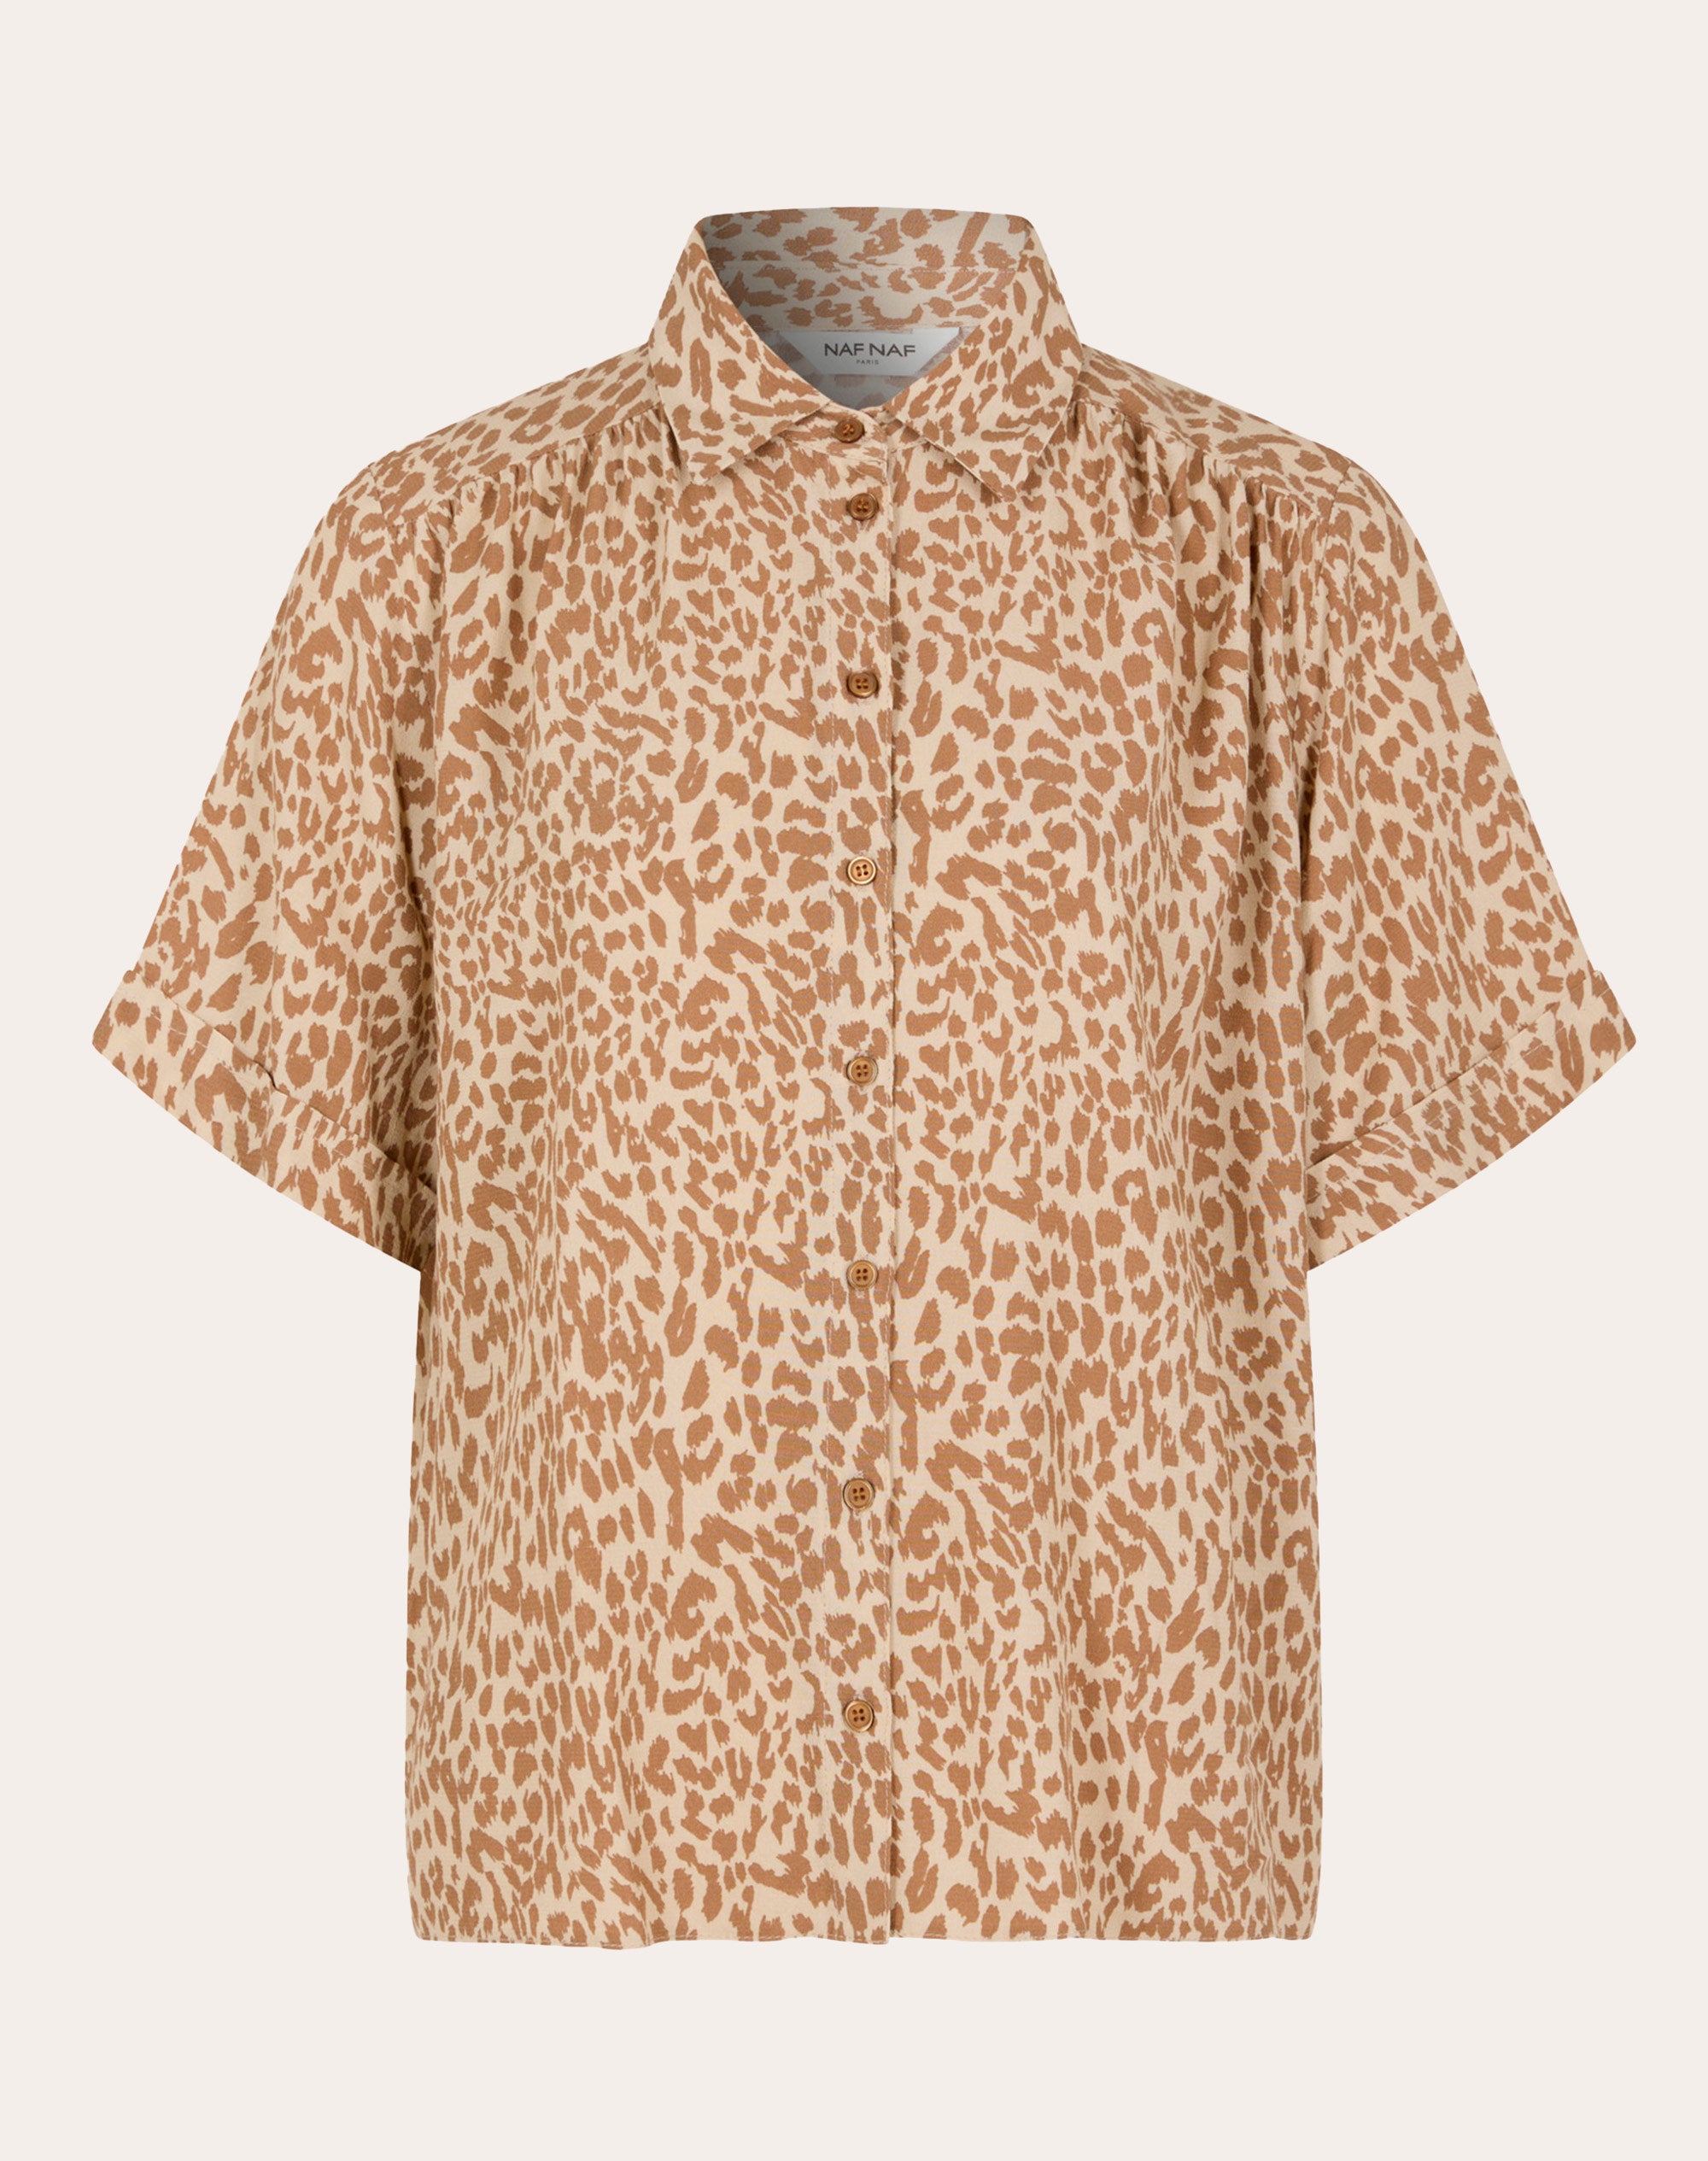 CAMISOLA MUJER ANIMAL PRINT COLOR